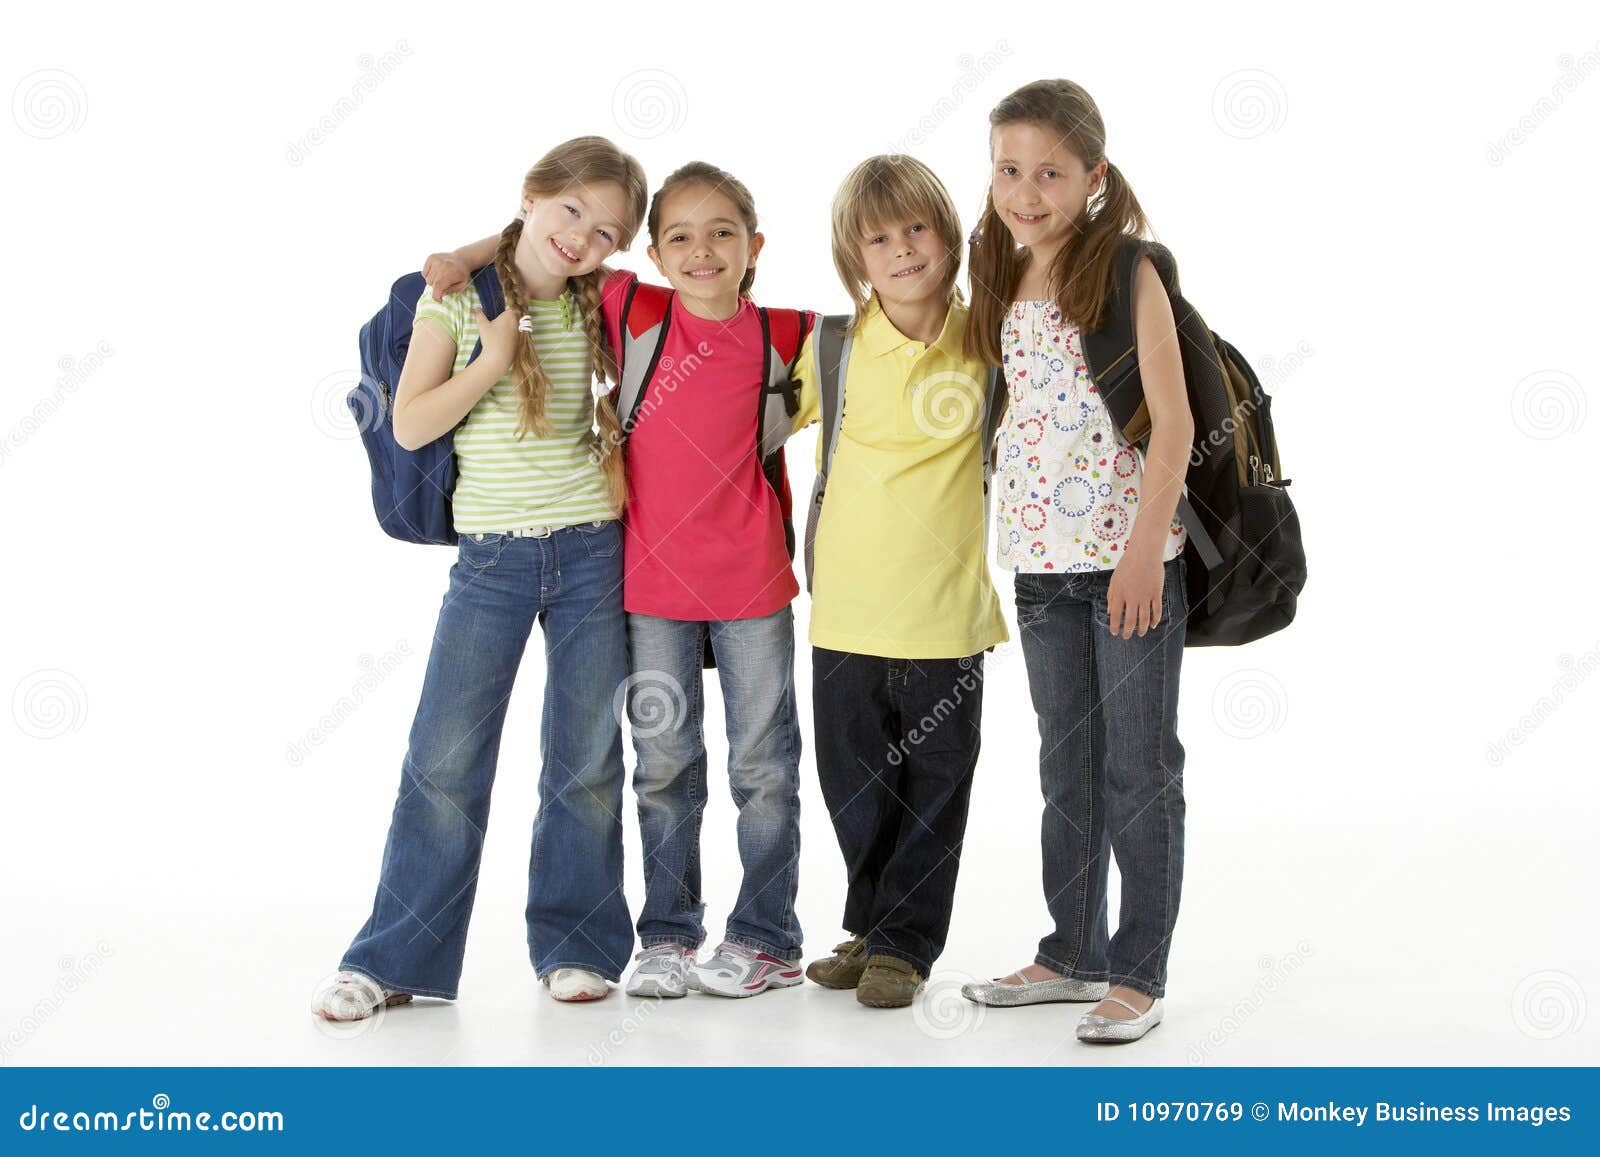 4,907 Full Children Studio Background Stock Photos - Free & Royalty-Free  Stock Photos from Dreamstime